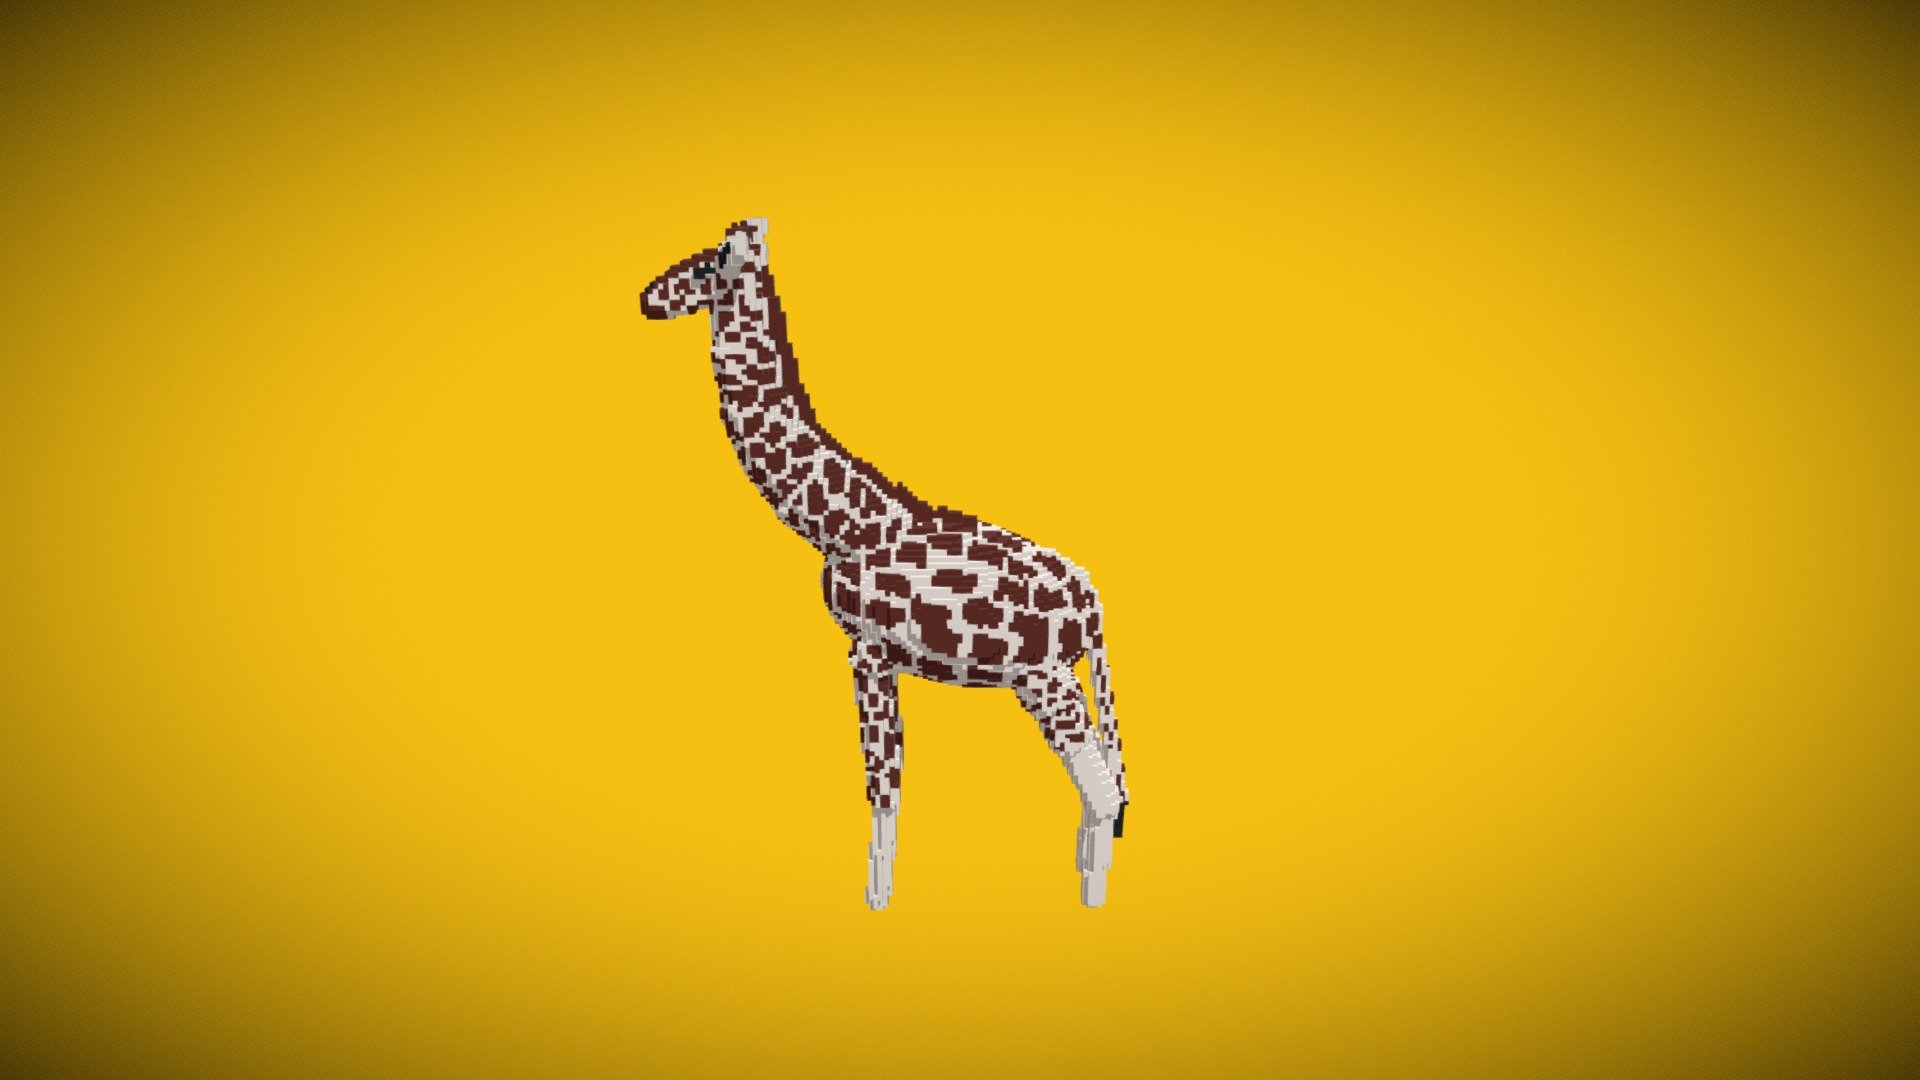 Giraffe Model Minecraft Safari Animal With Files 3d Model By Electro3d Electro3d Aa2f80a